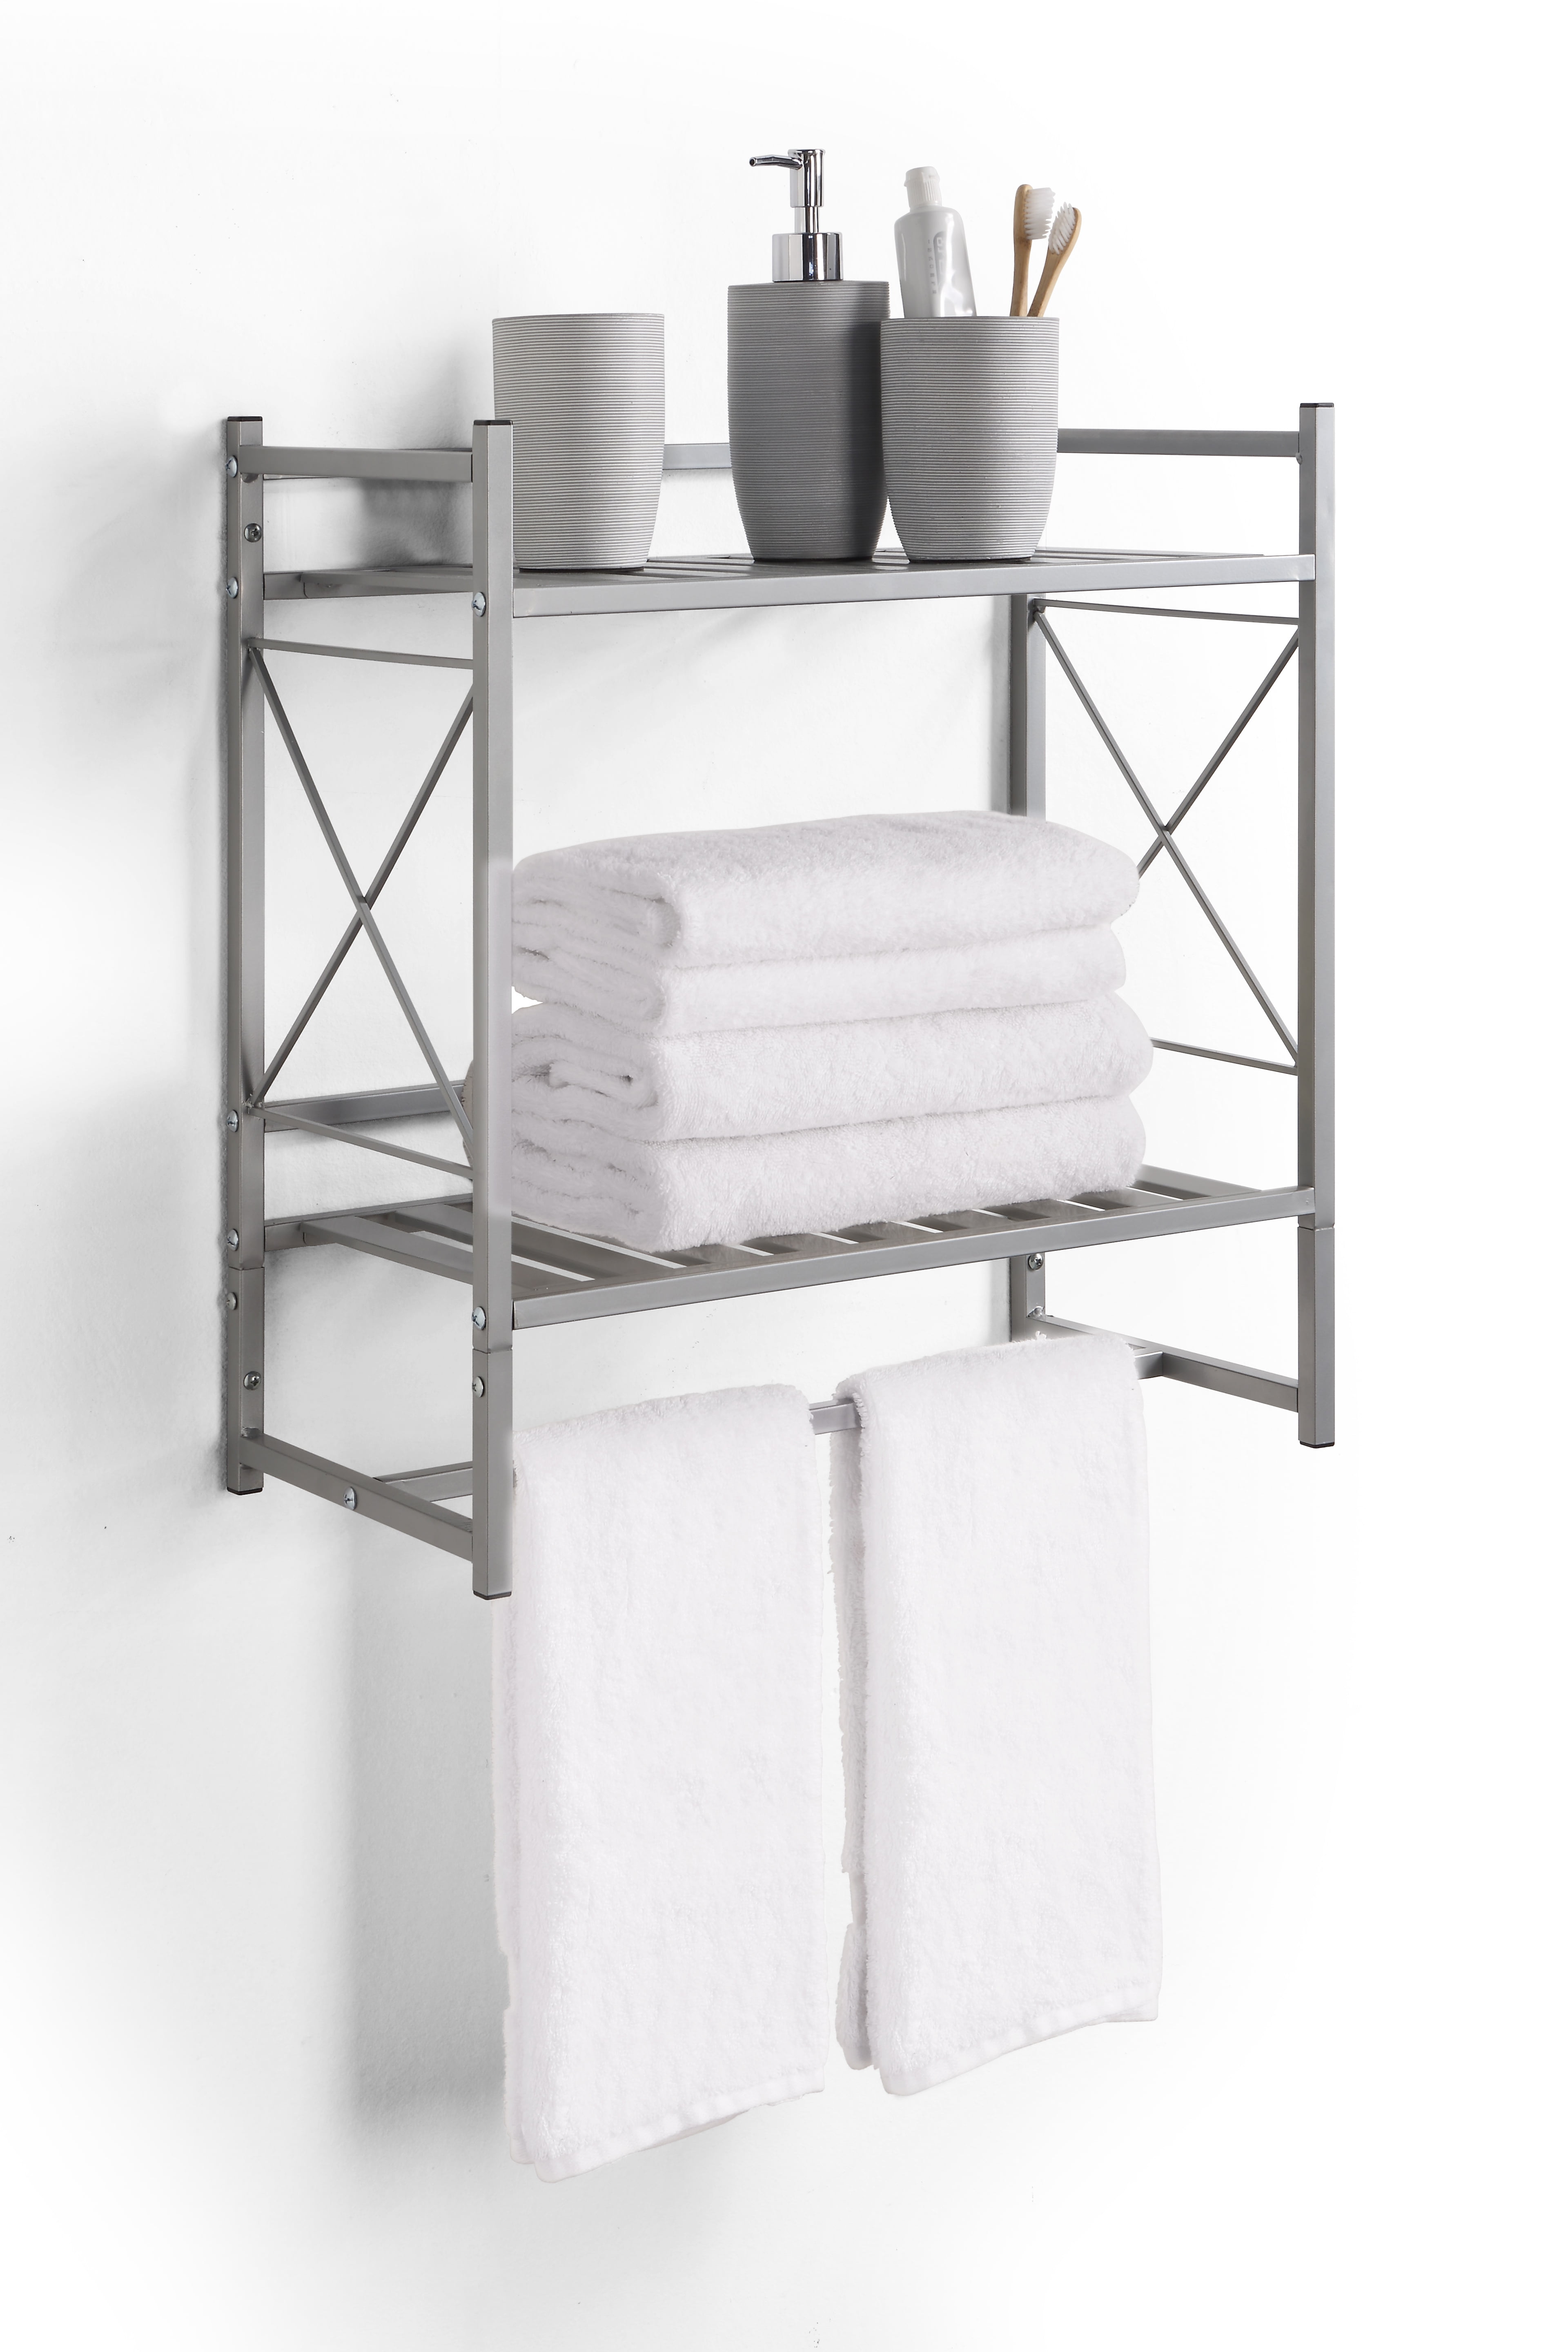 SunnyPoint Classic Wall Mounted Shower Caddy Organizer Basket Shelf With  Removable Adhesive Hook. No Drilling Needed